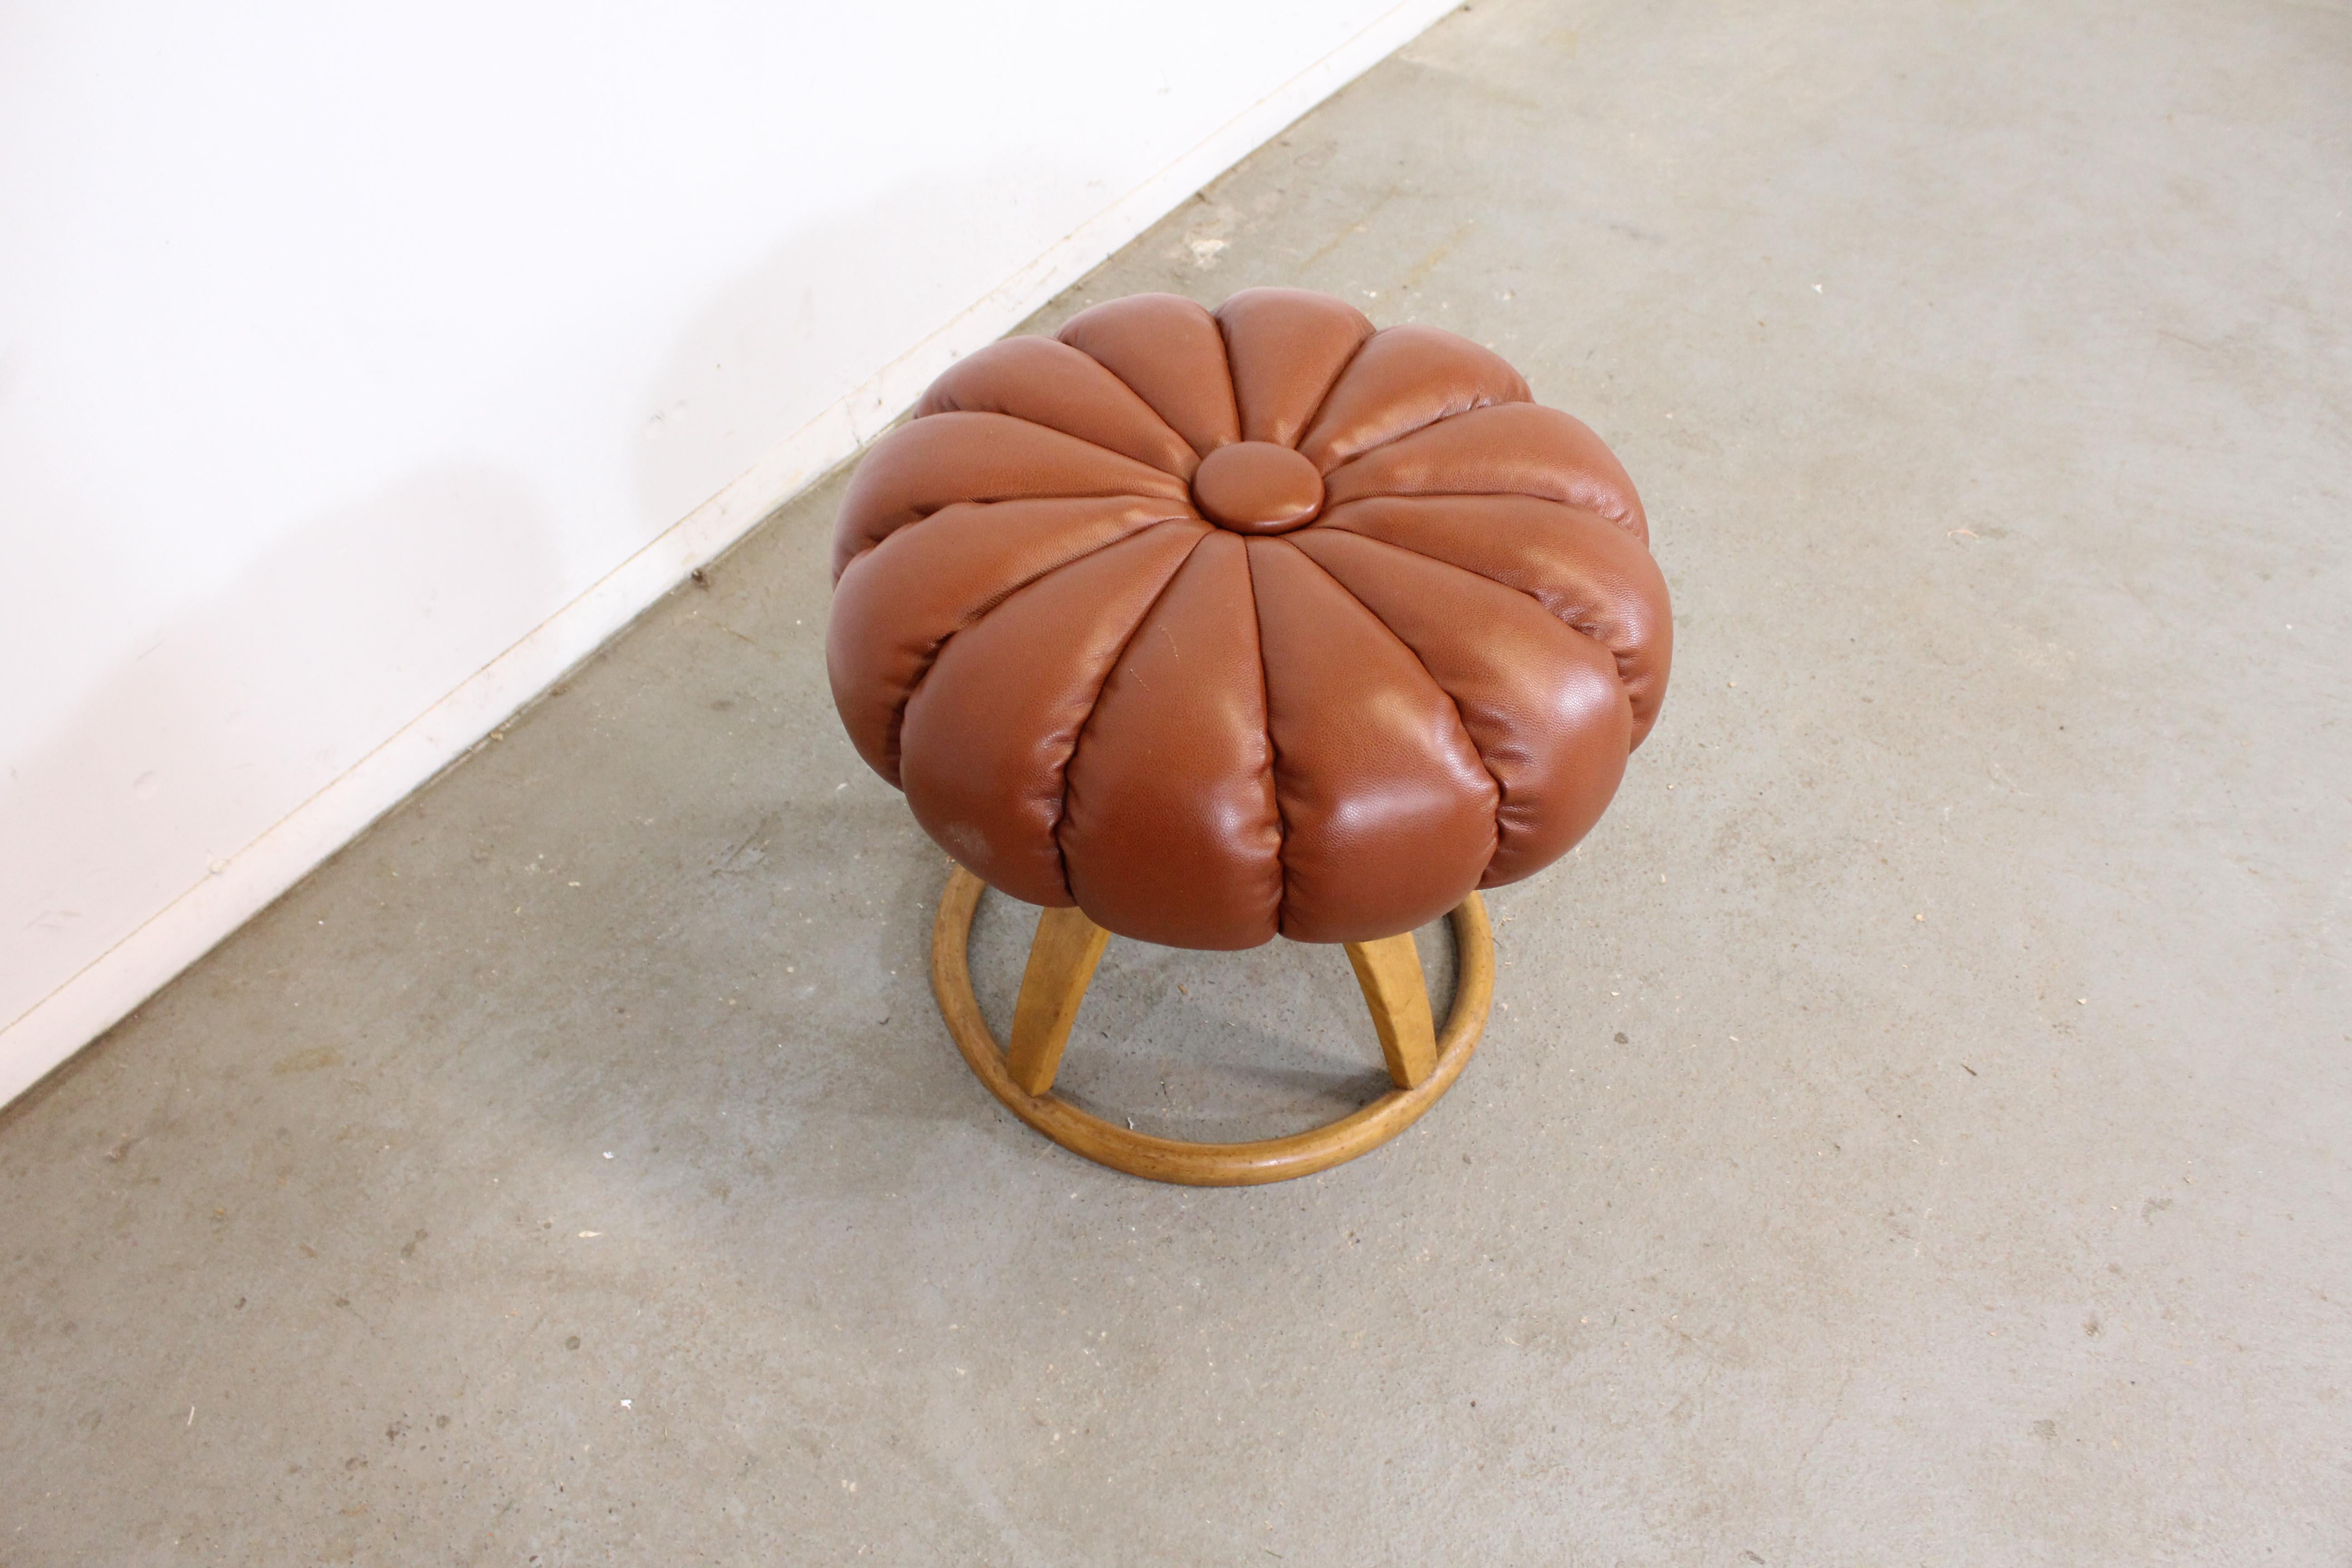 Mid-Century Modern Heywood Wakefield ottoman

Offered is a Mid-Century Modern Heywood Wakefield Champagne ottoman/pouf. It is structurally sound, and has been refinished. It does have a crack in the base and a few scratches on the top. It is in